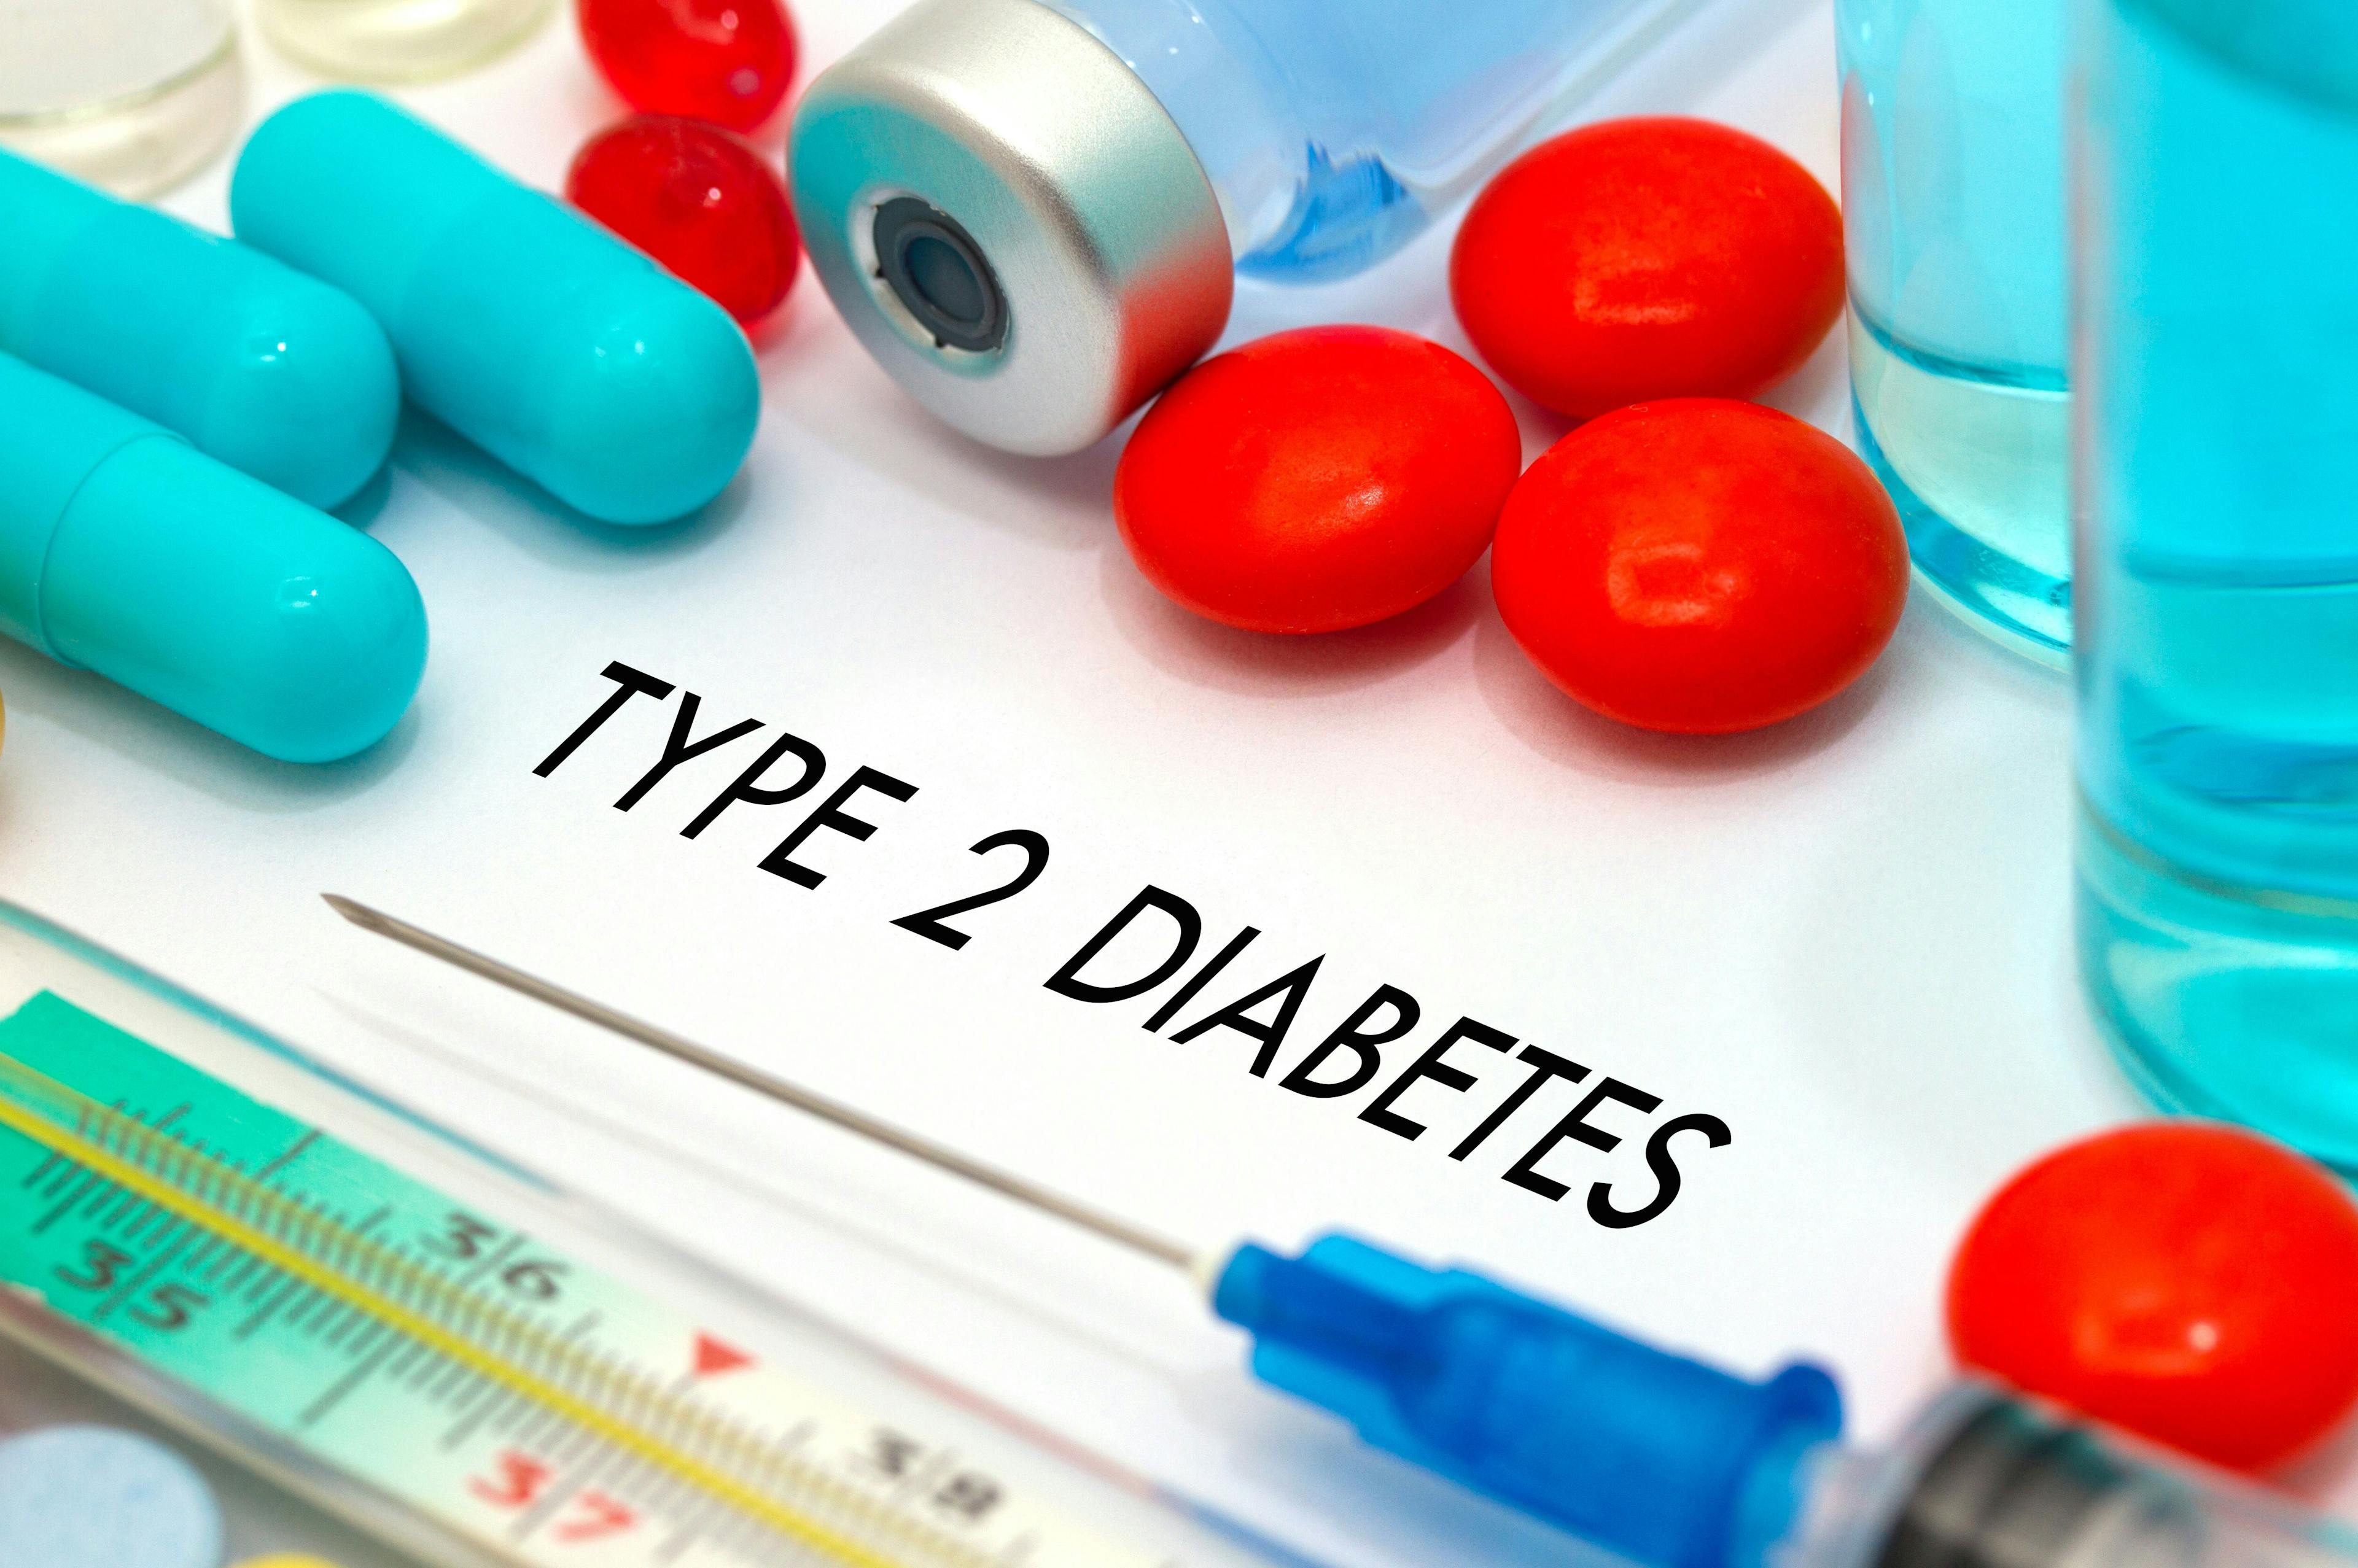 Comprehensive Medication Reviews Can Help Improve Adherence in Patients With T2D